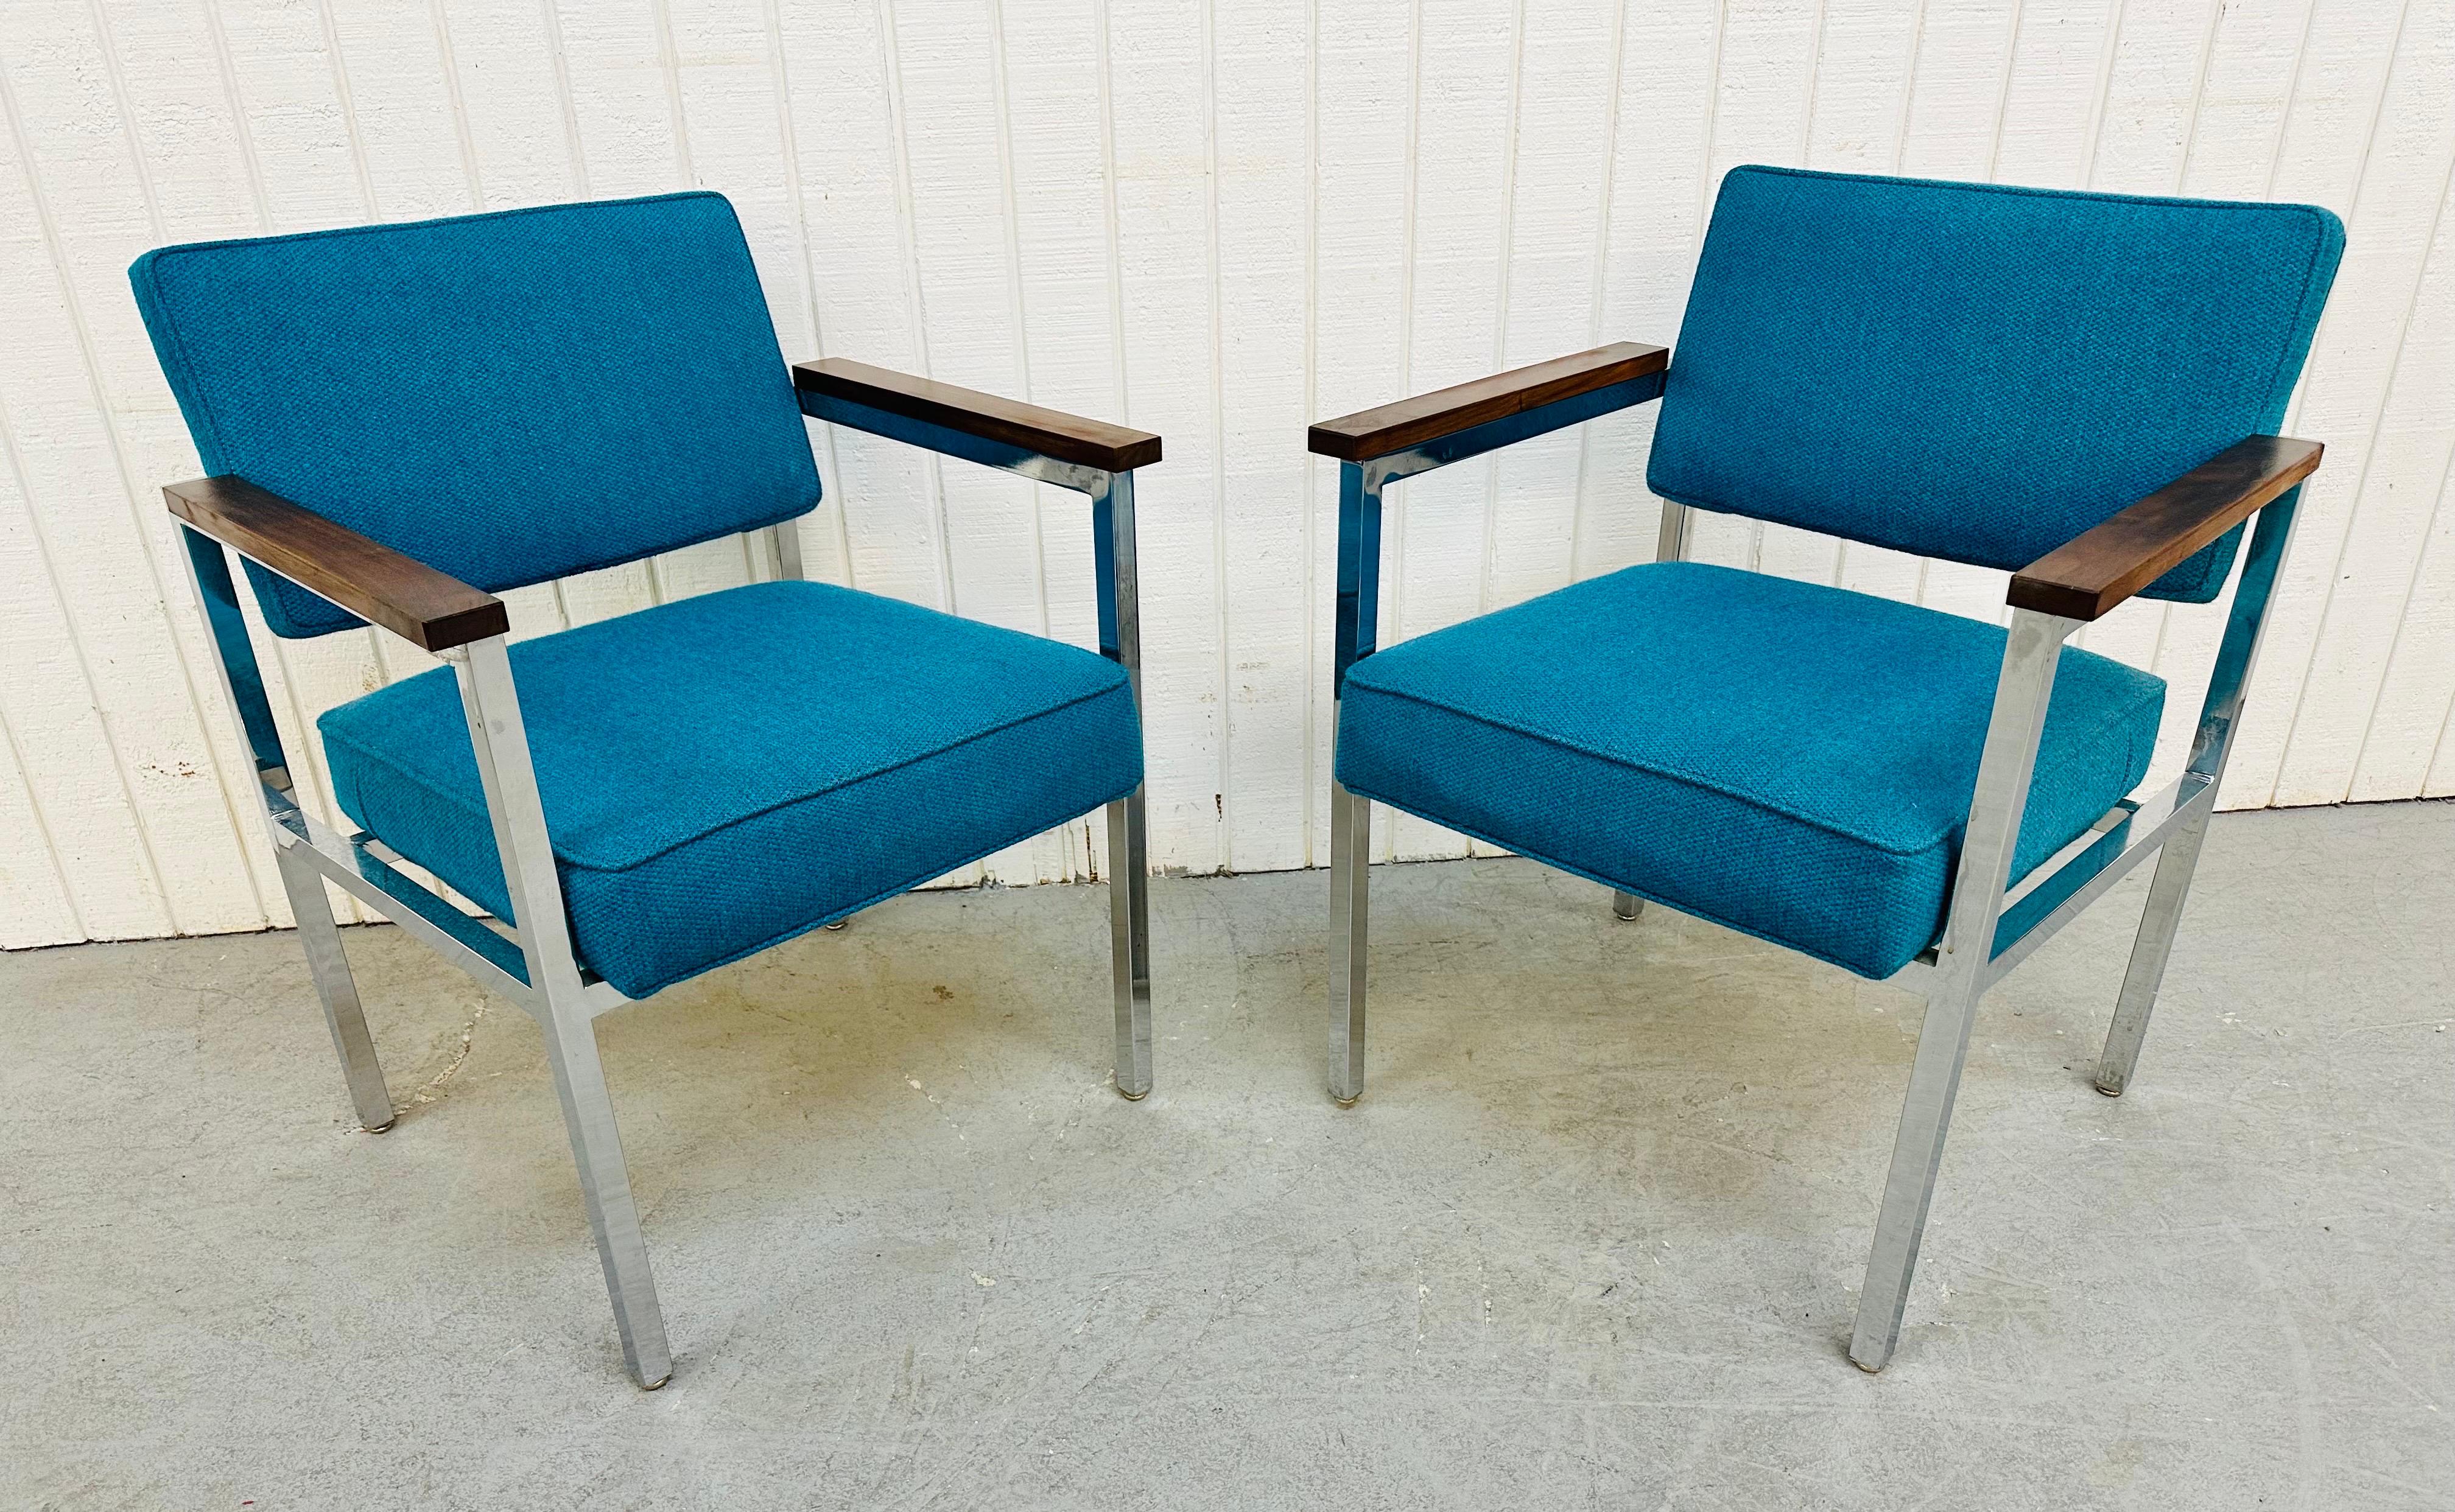 This listing is for a pair of Mid-Century Modern chrome armchairs. Featuring a chrome frame, walnut arm rests, beautiful blue upholstered seats and back rests. This is an exceptional combination of quality and design.